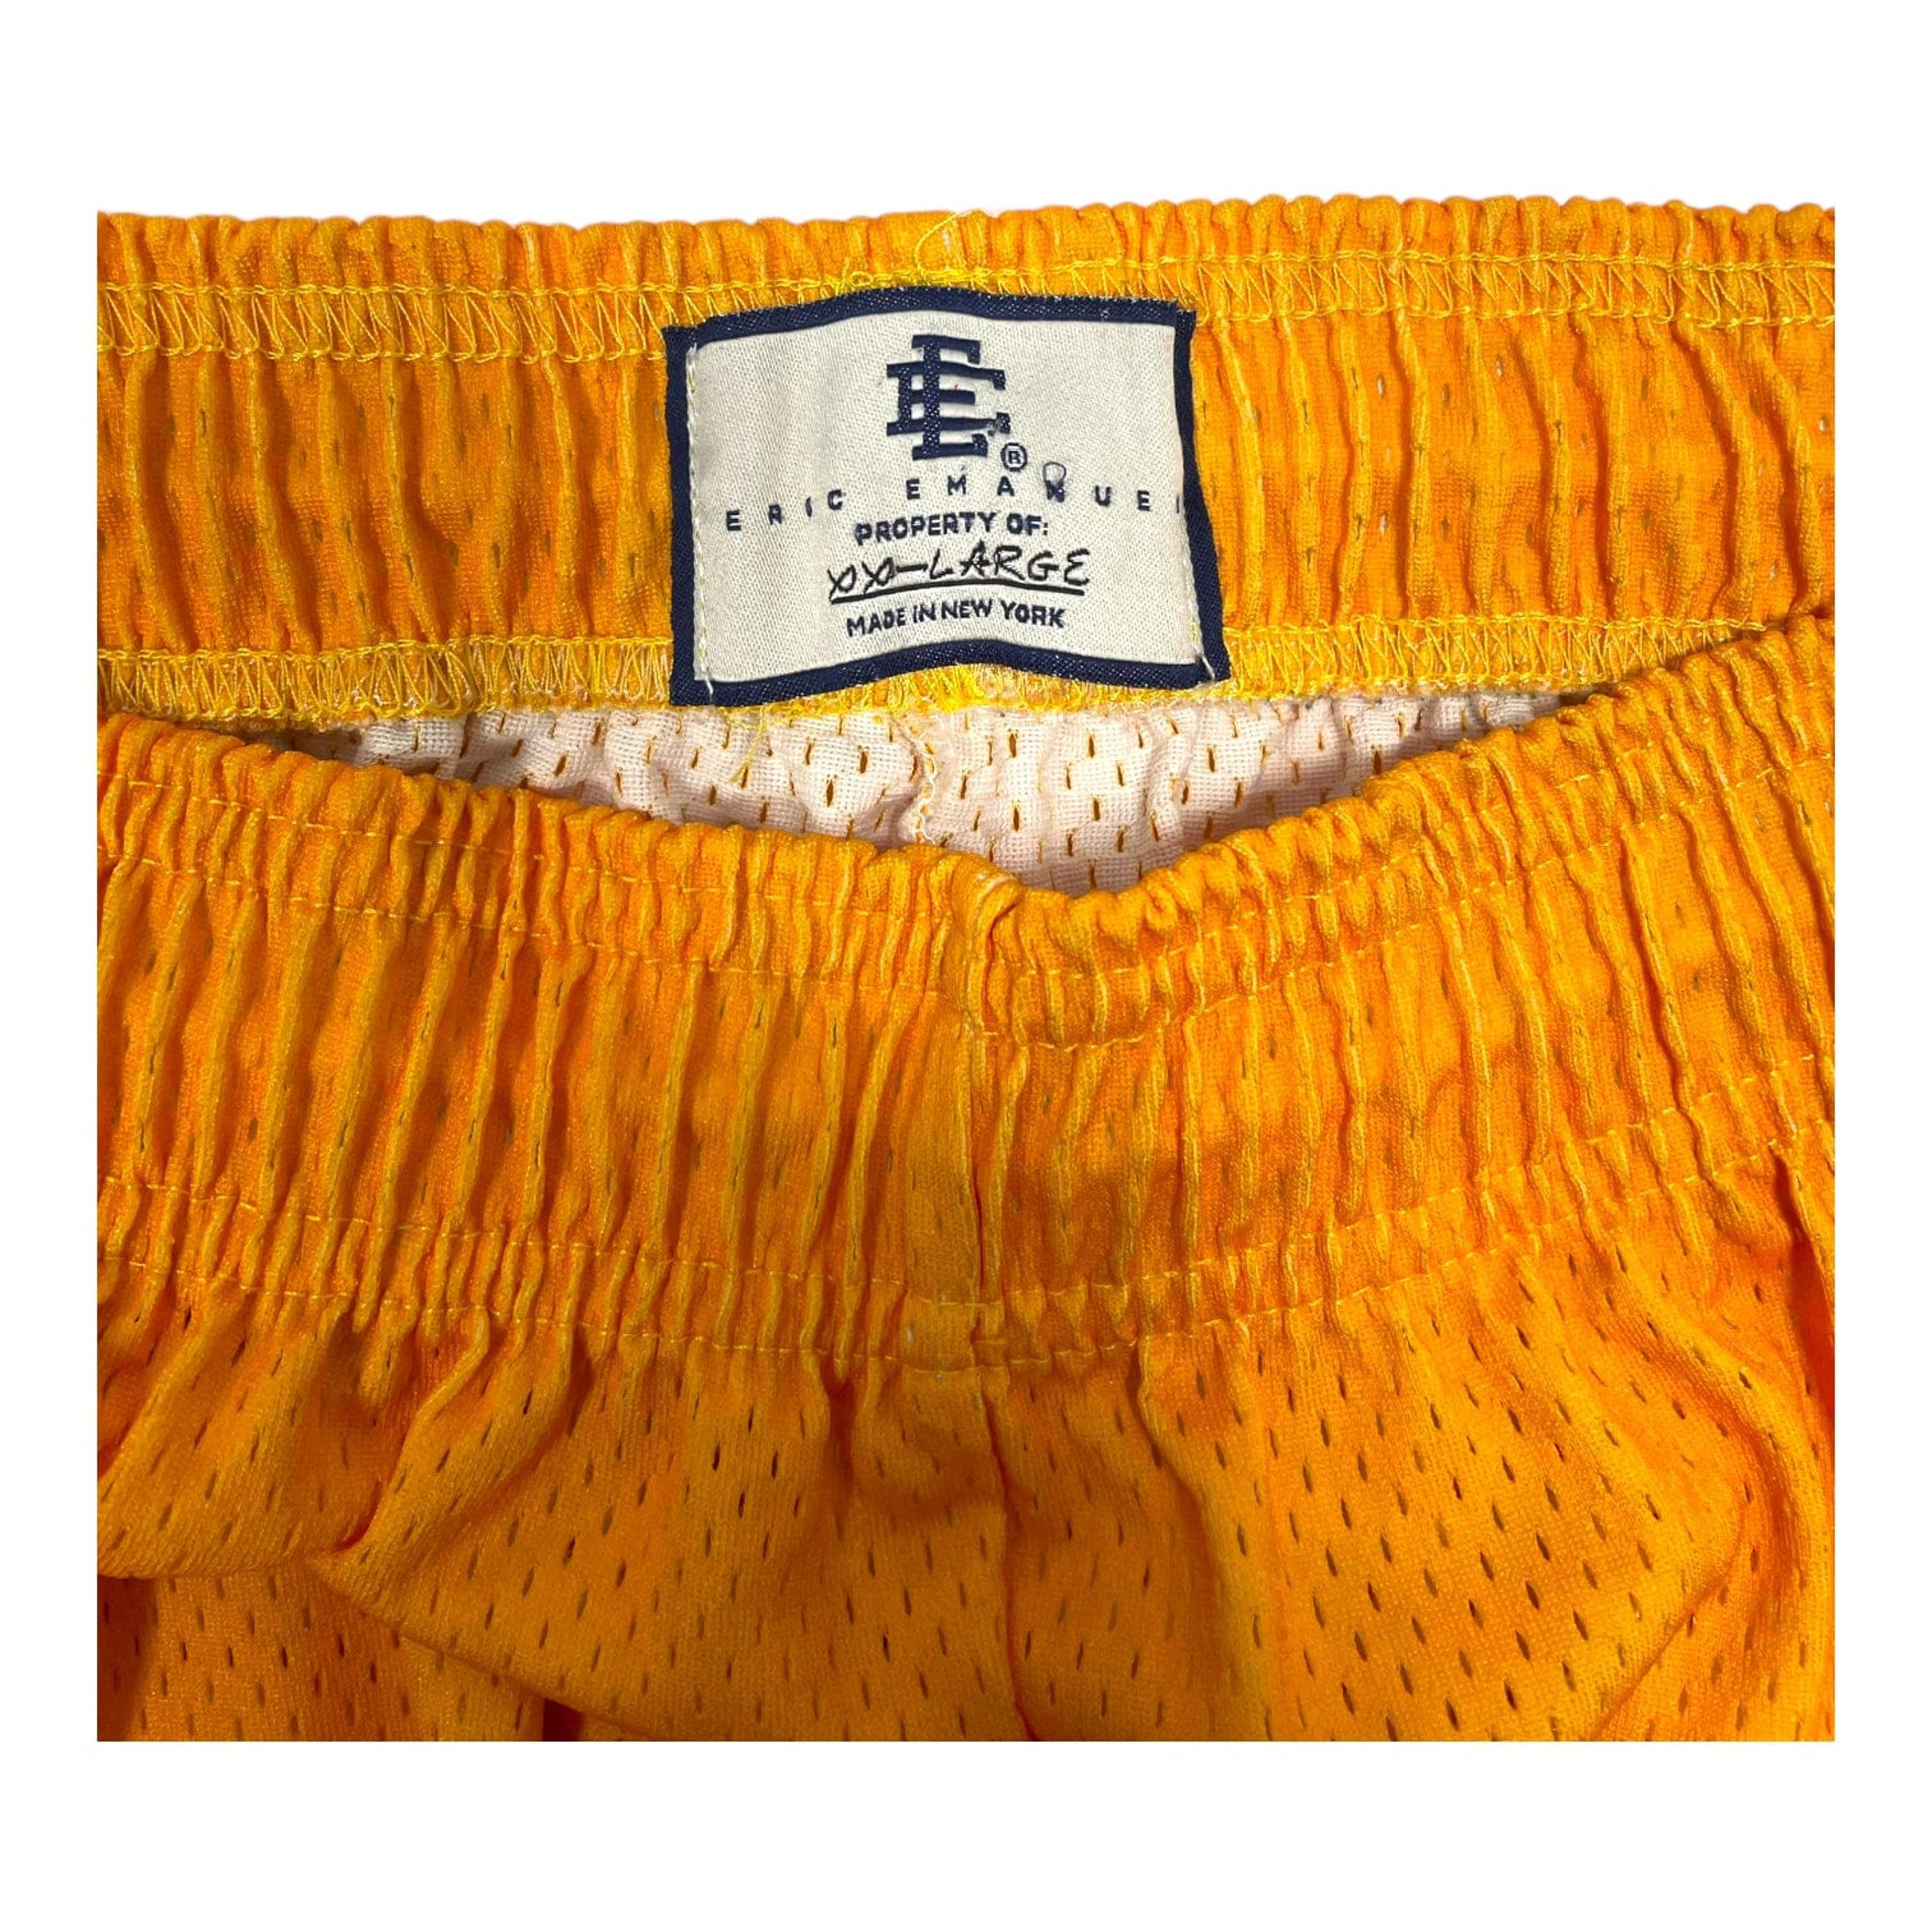 Alternate View 3 of Eric Emanuel EE Basic Shorts Gold Palm Pre-Owned